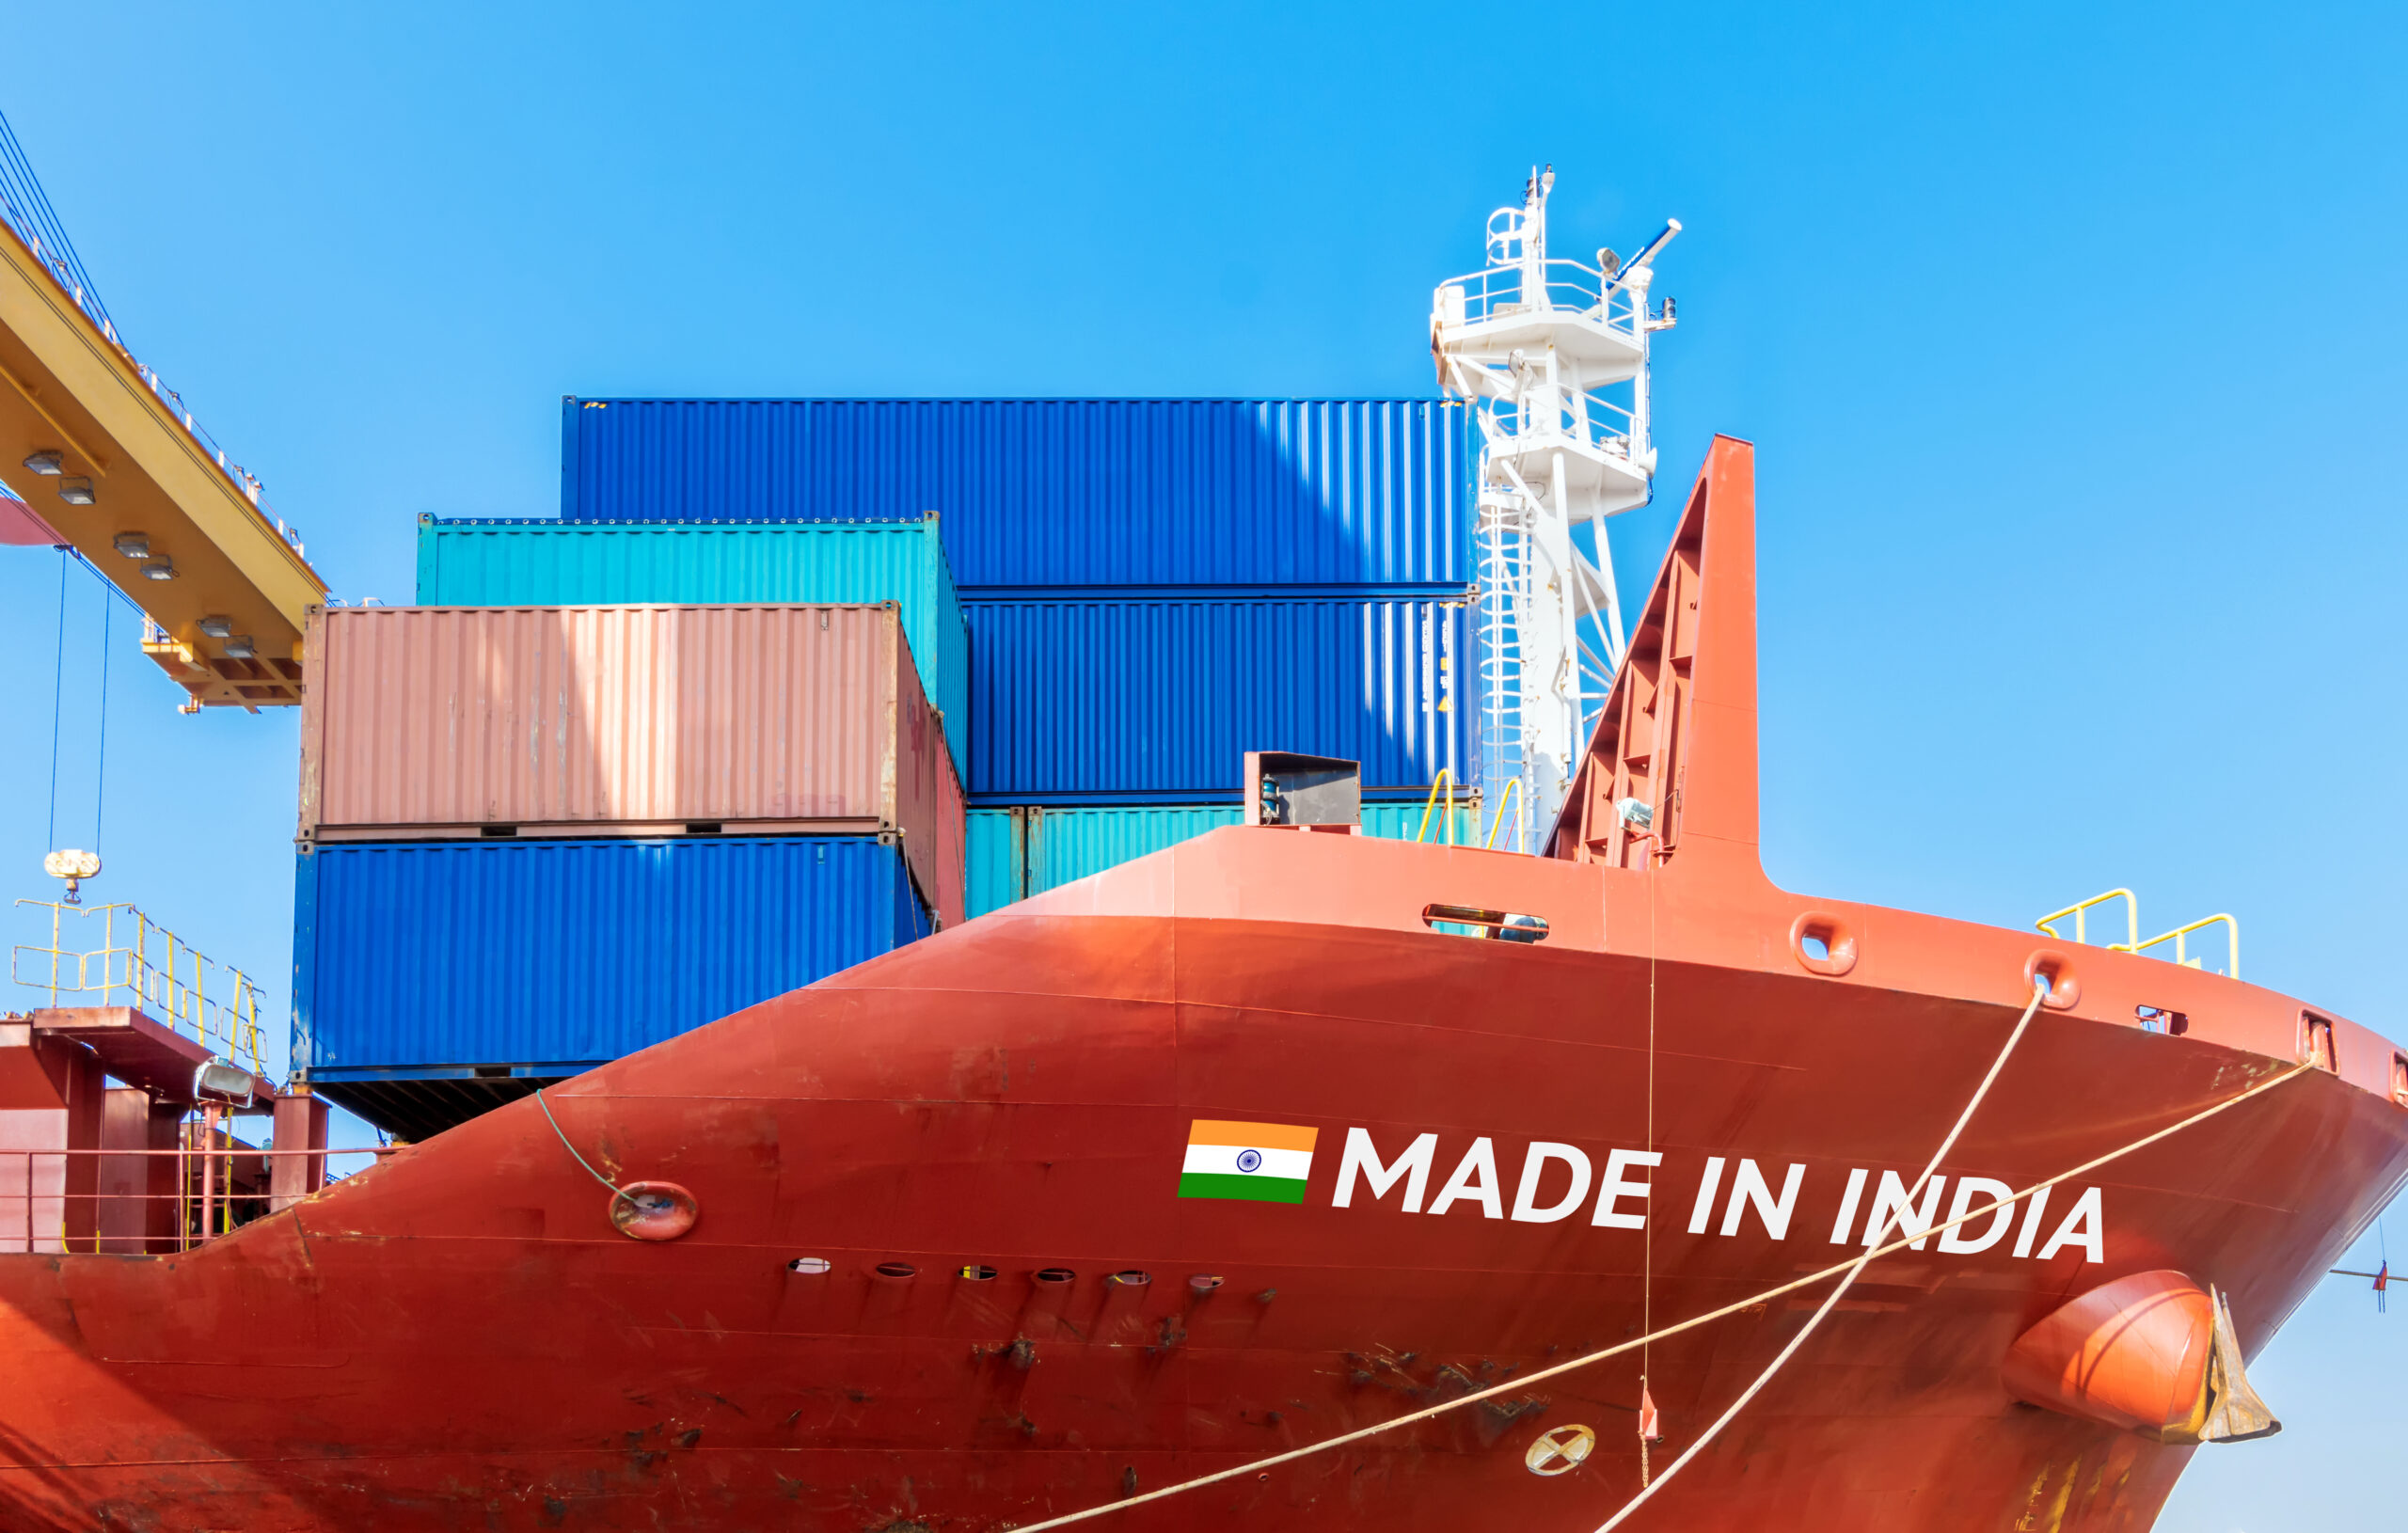 A large red freighter ship that says Made in India on it.